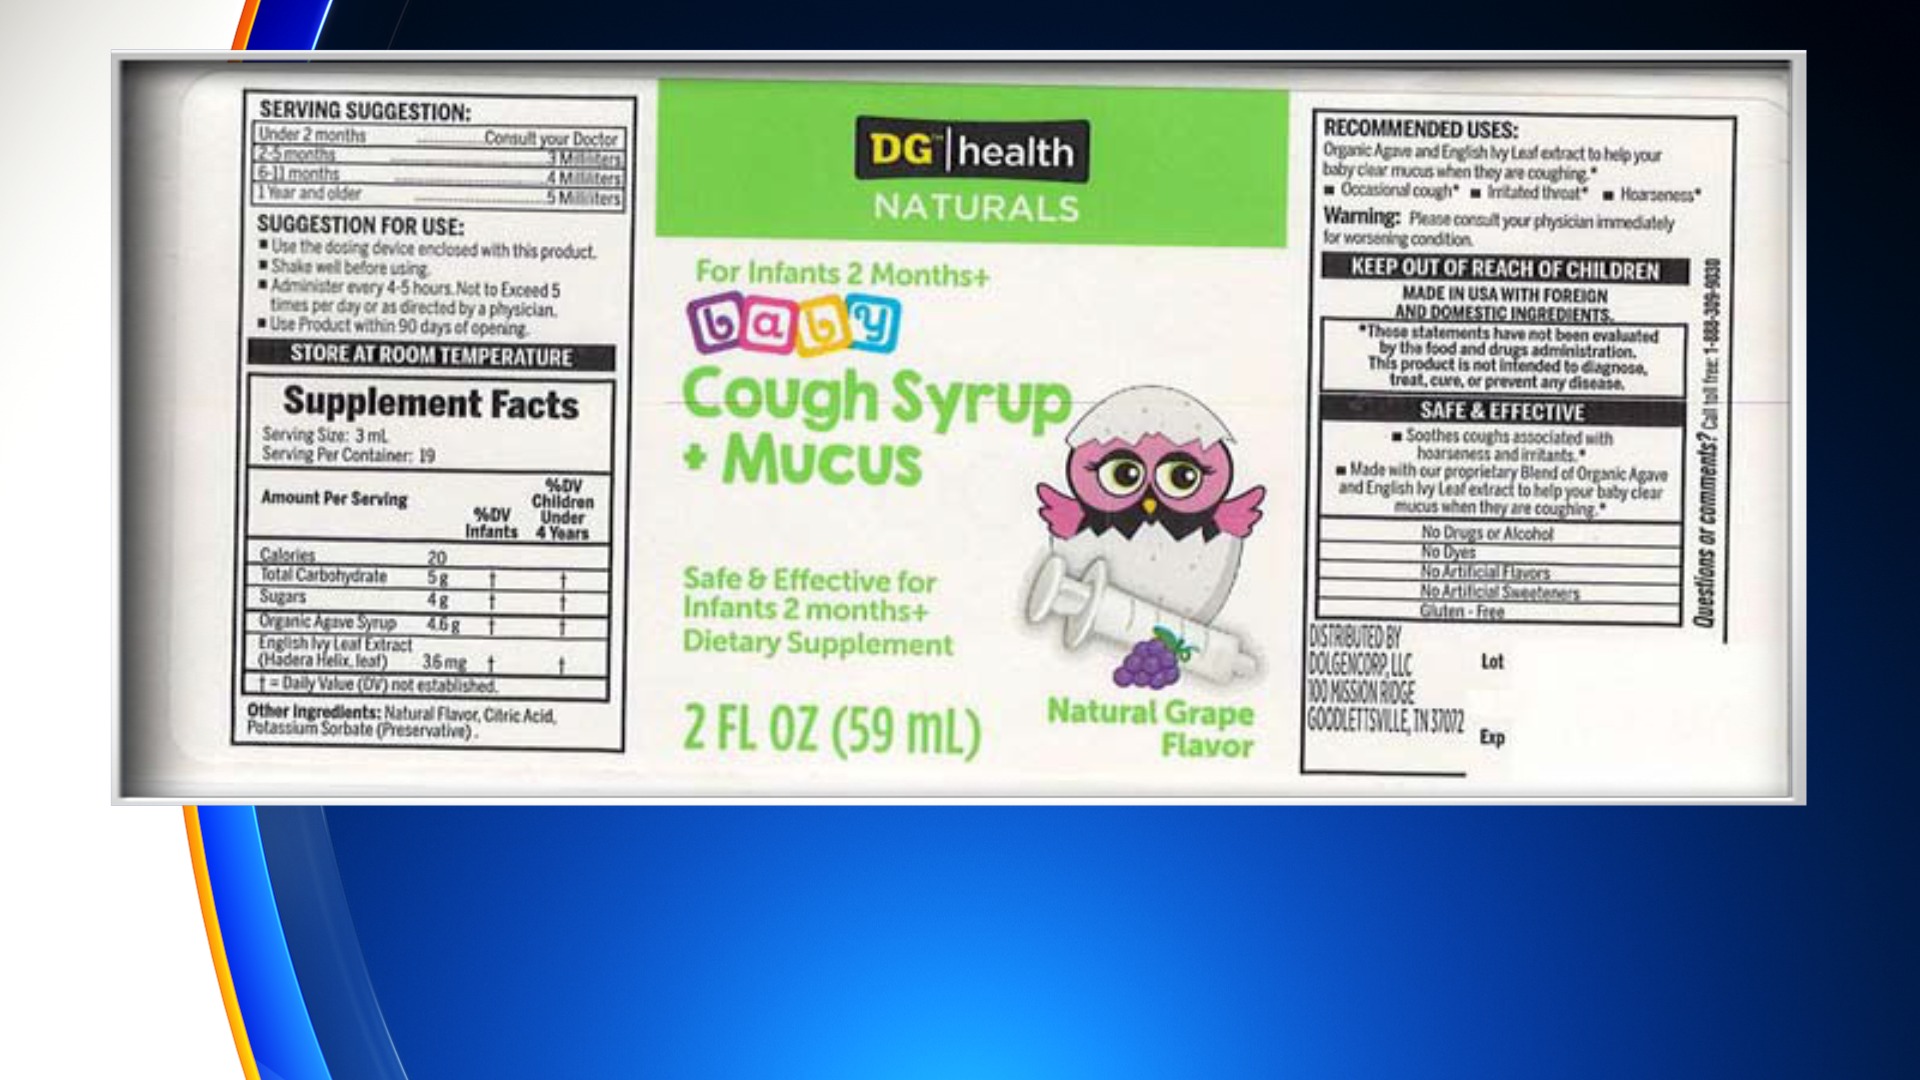 DG™/health NATURALS baby Cough Syrup + Mucus recall